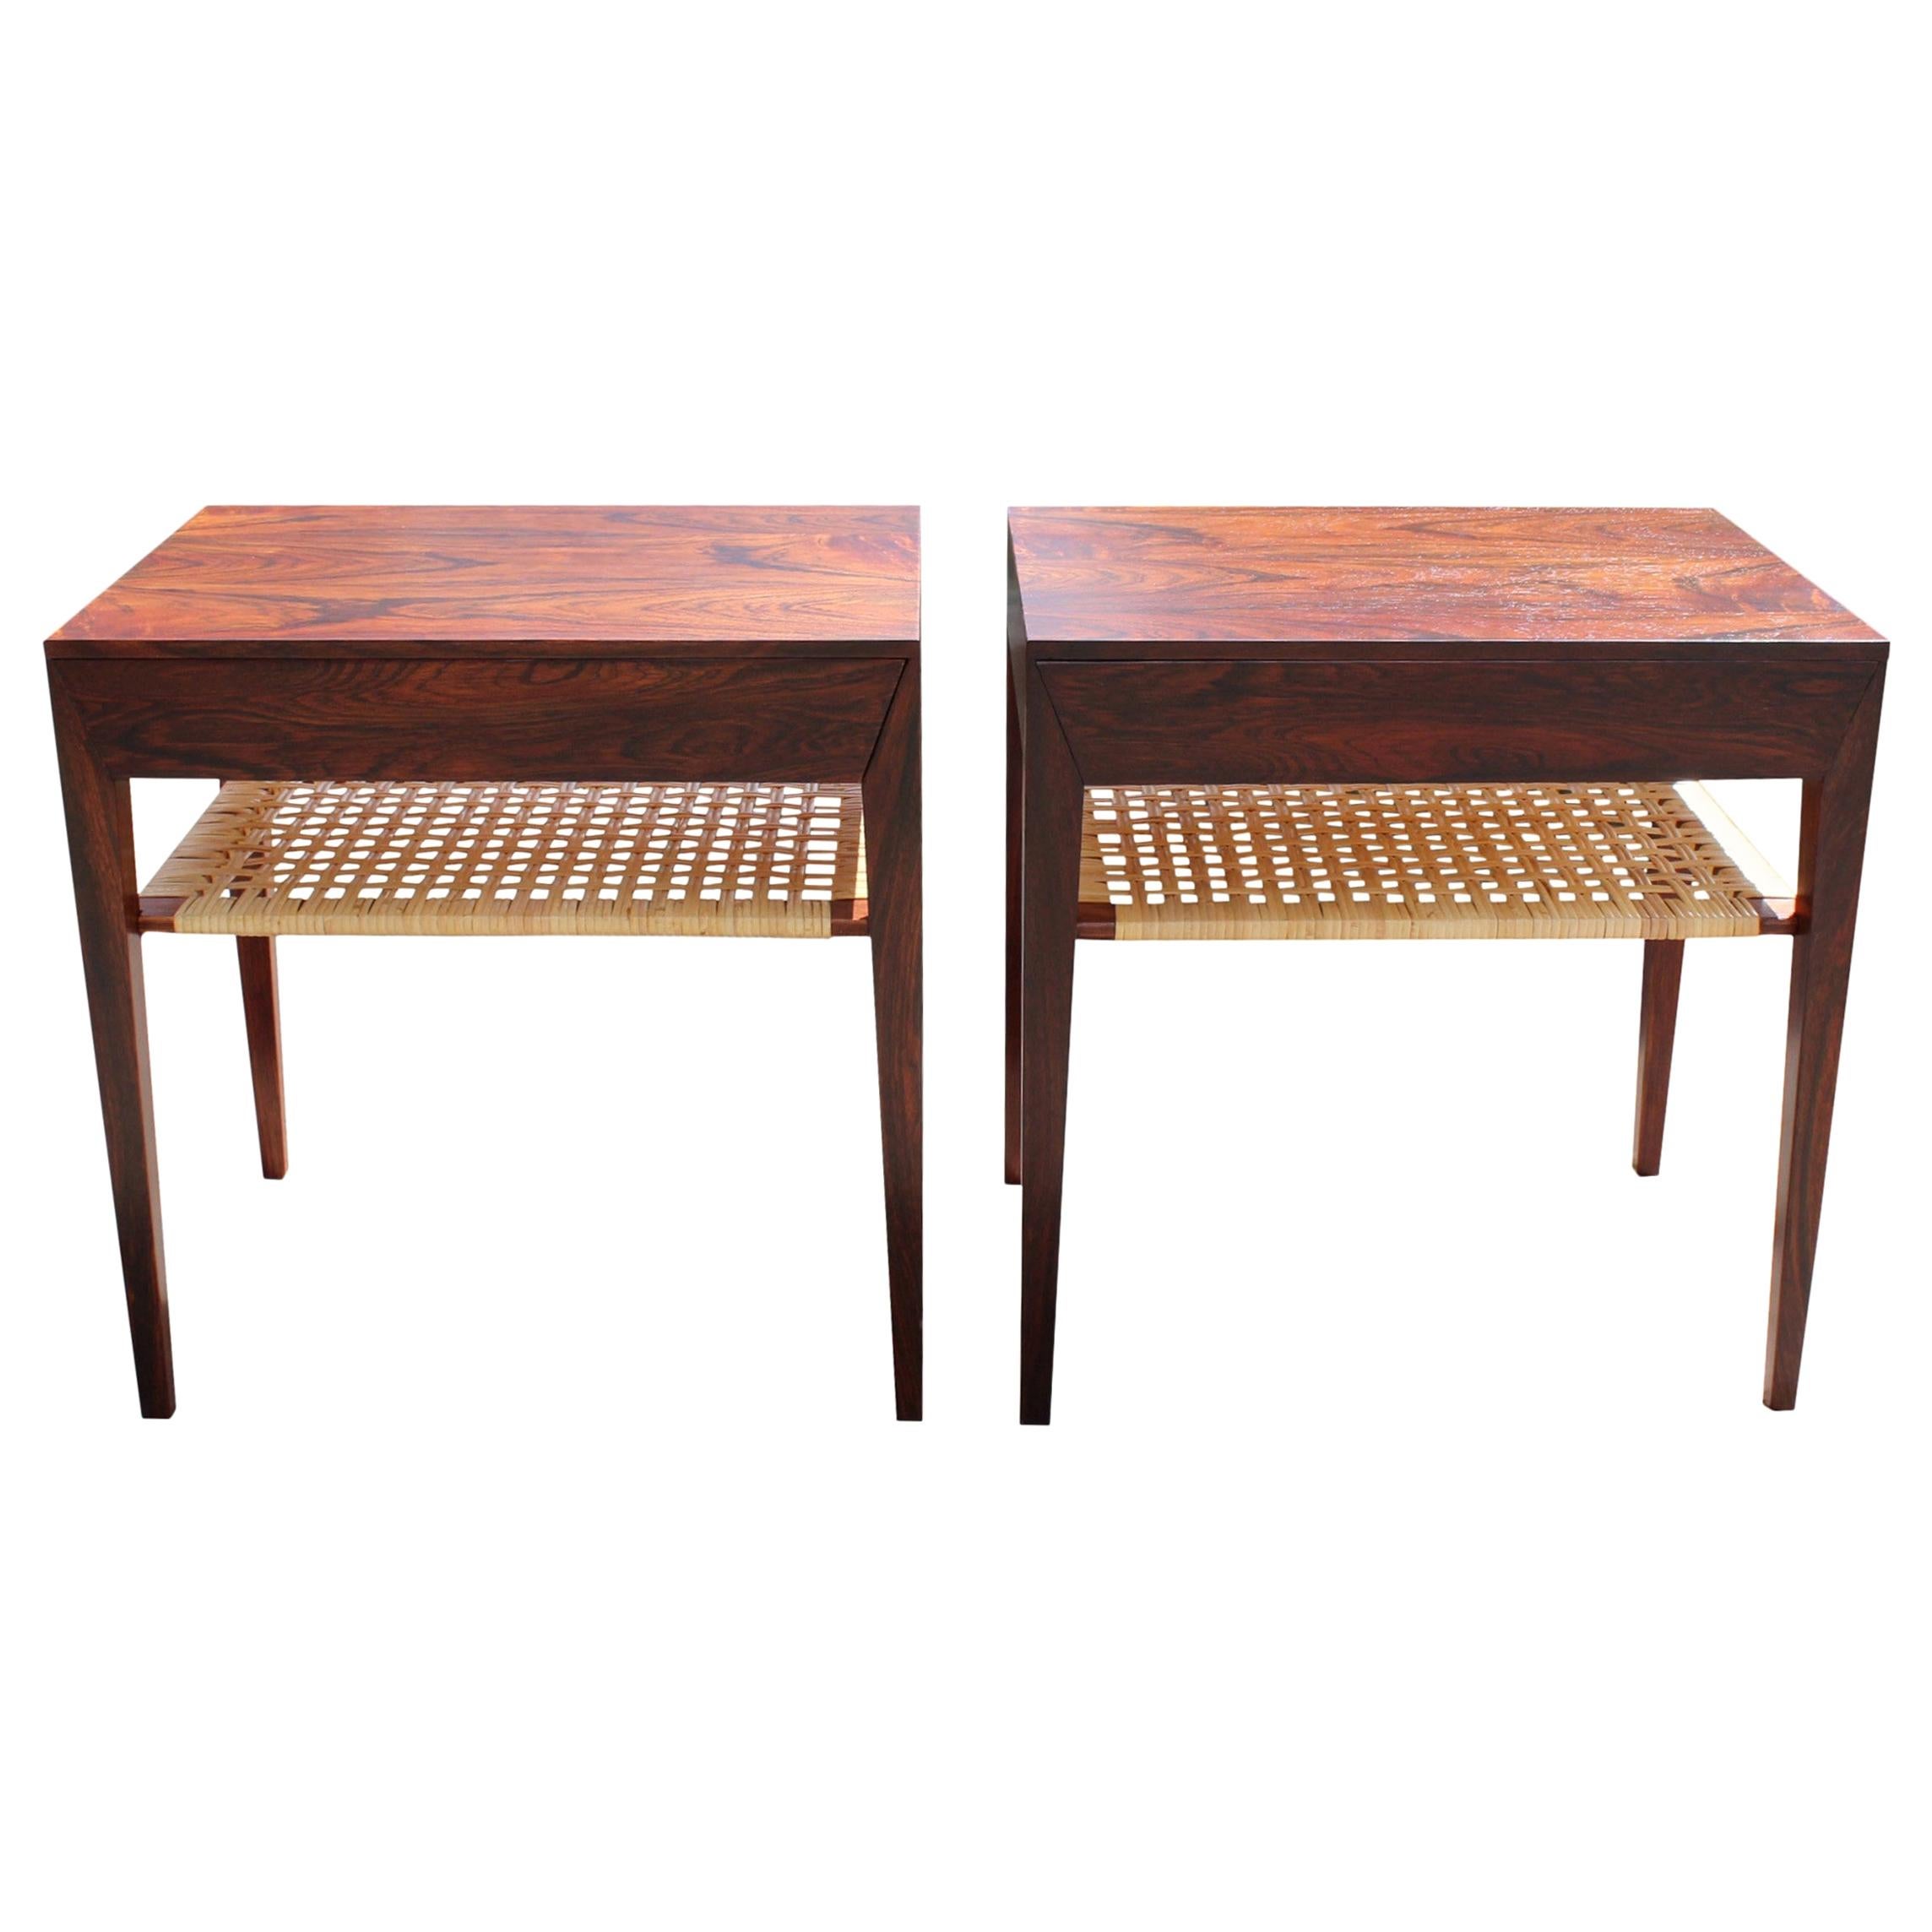 Set of Bedside Tables in Rosewood and Papercord Shelf by Severin Hansen, 1960s